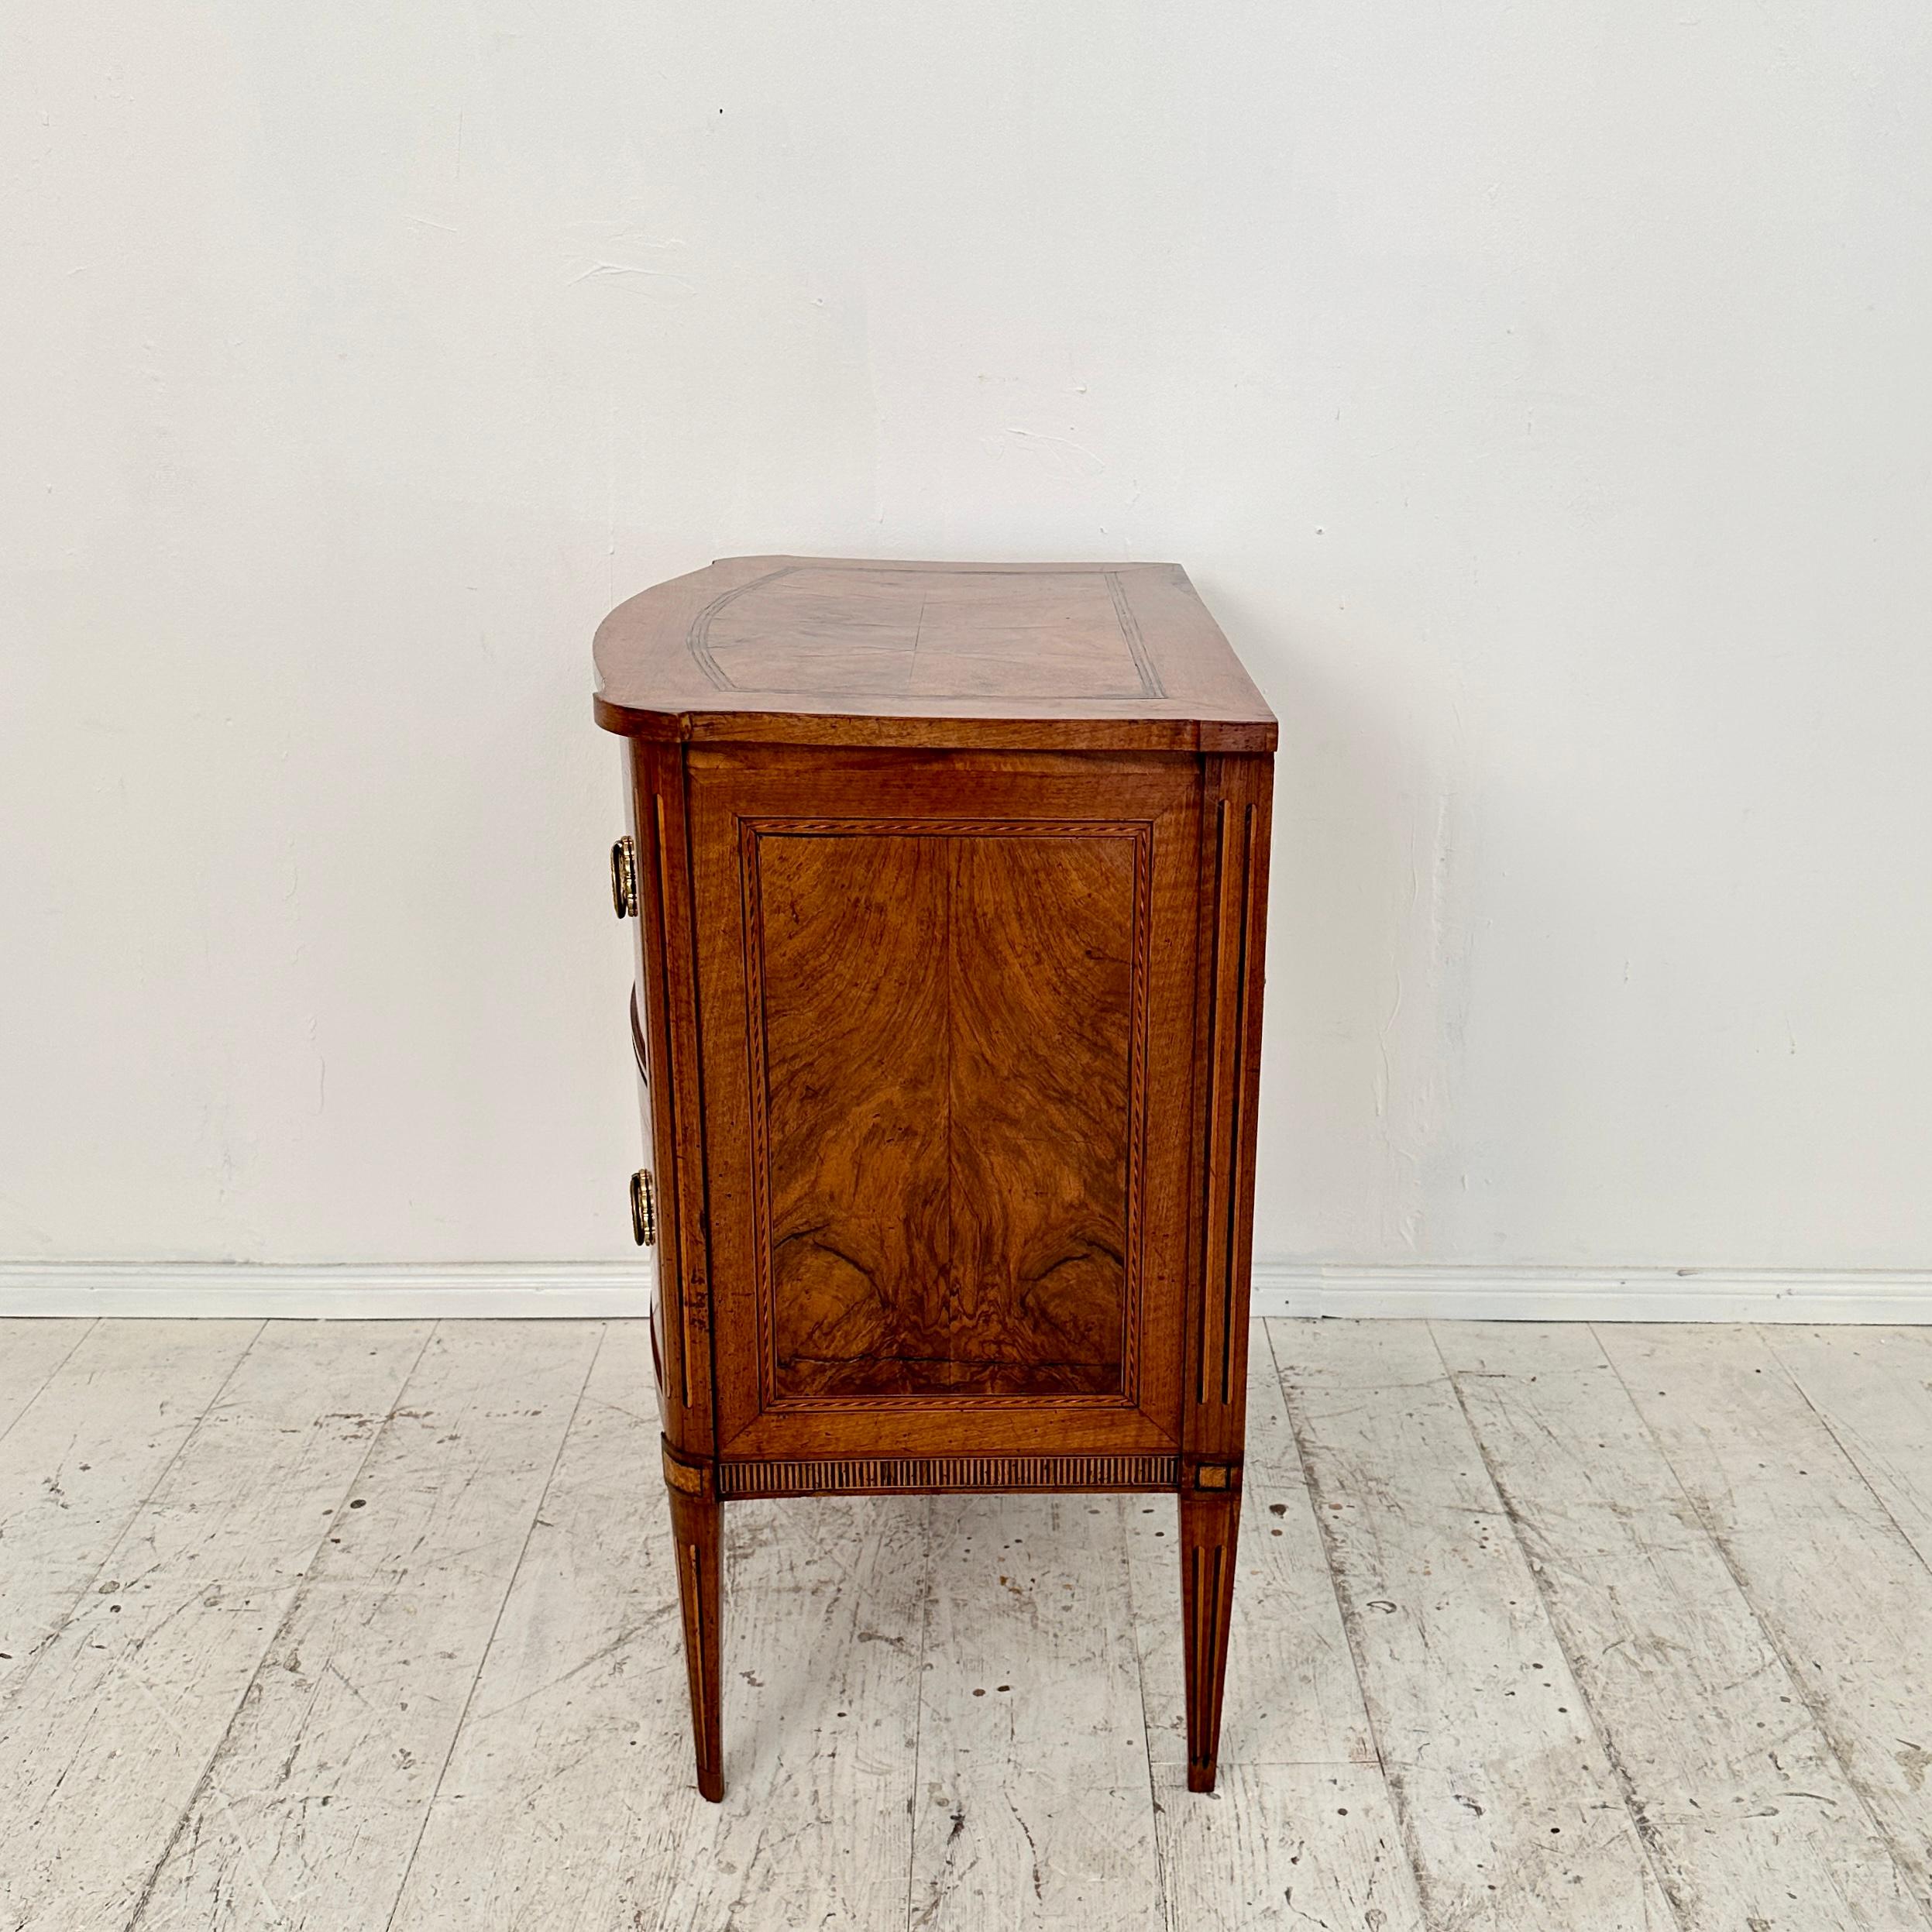 Small 18th Century German Louis Seize Commode in Walnut with 2 Drawers, 1790 For Sale 1